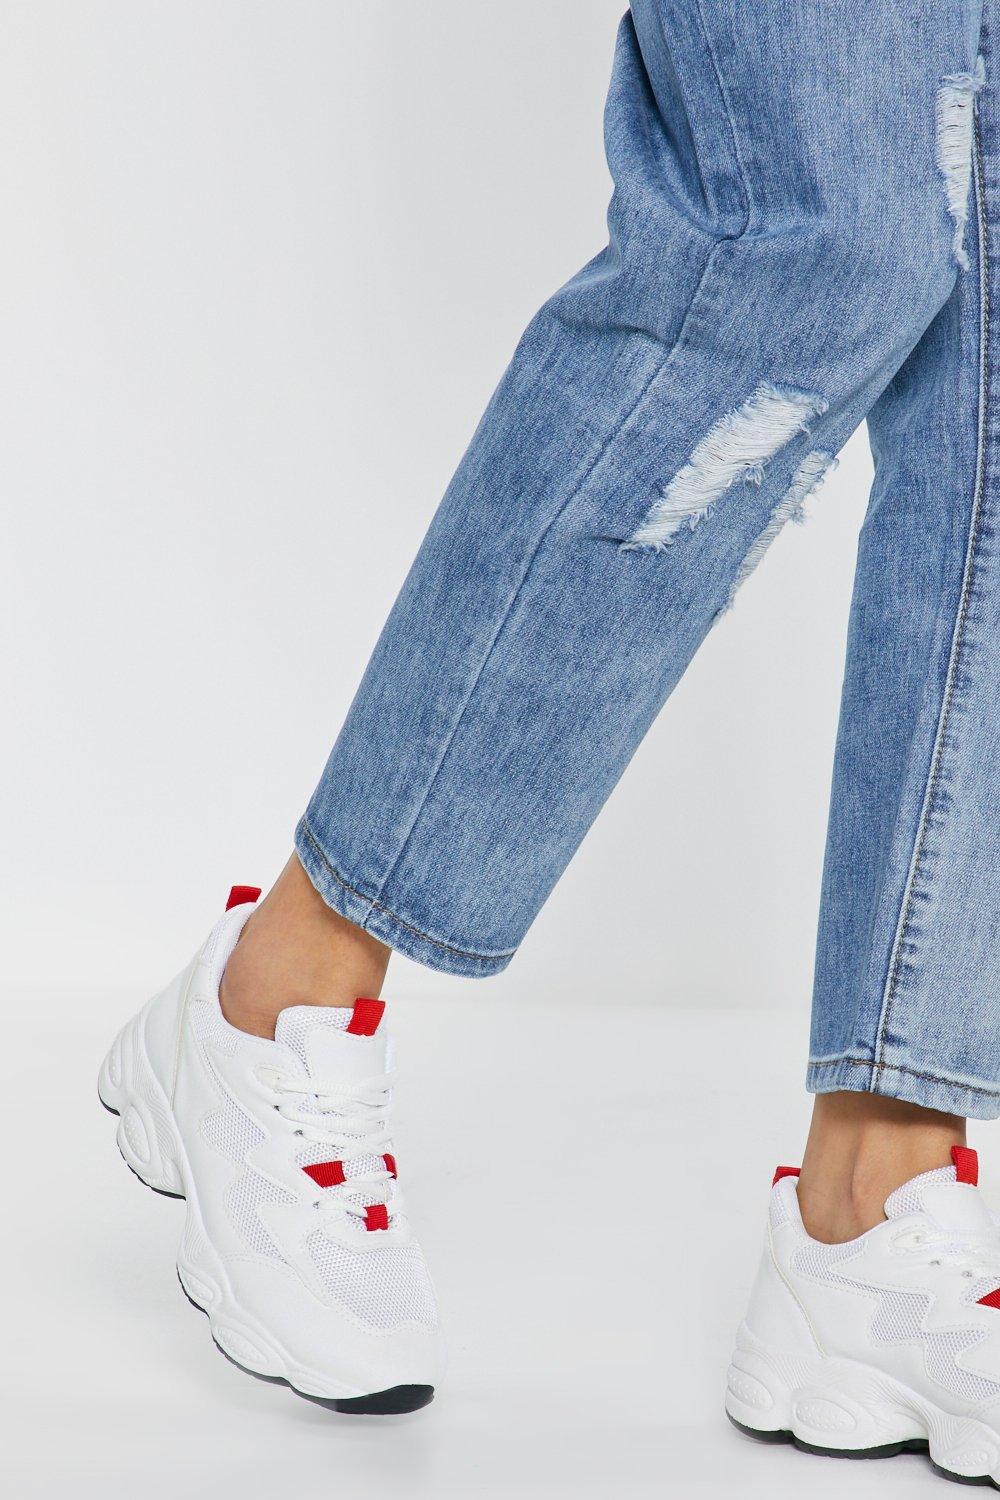 red sole sneakers